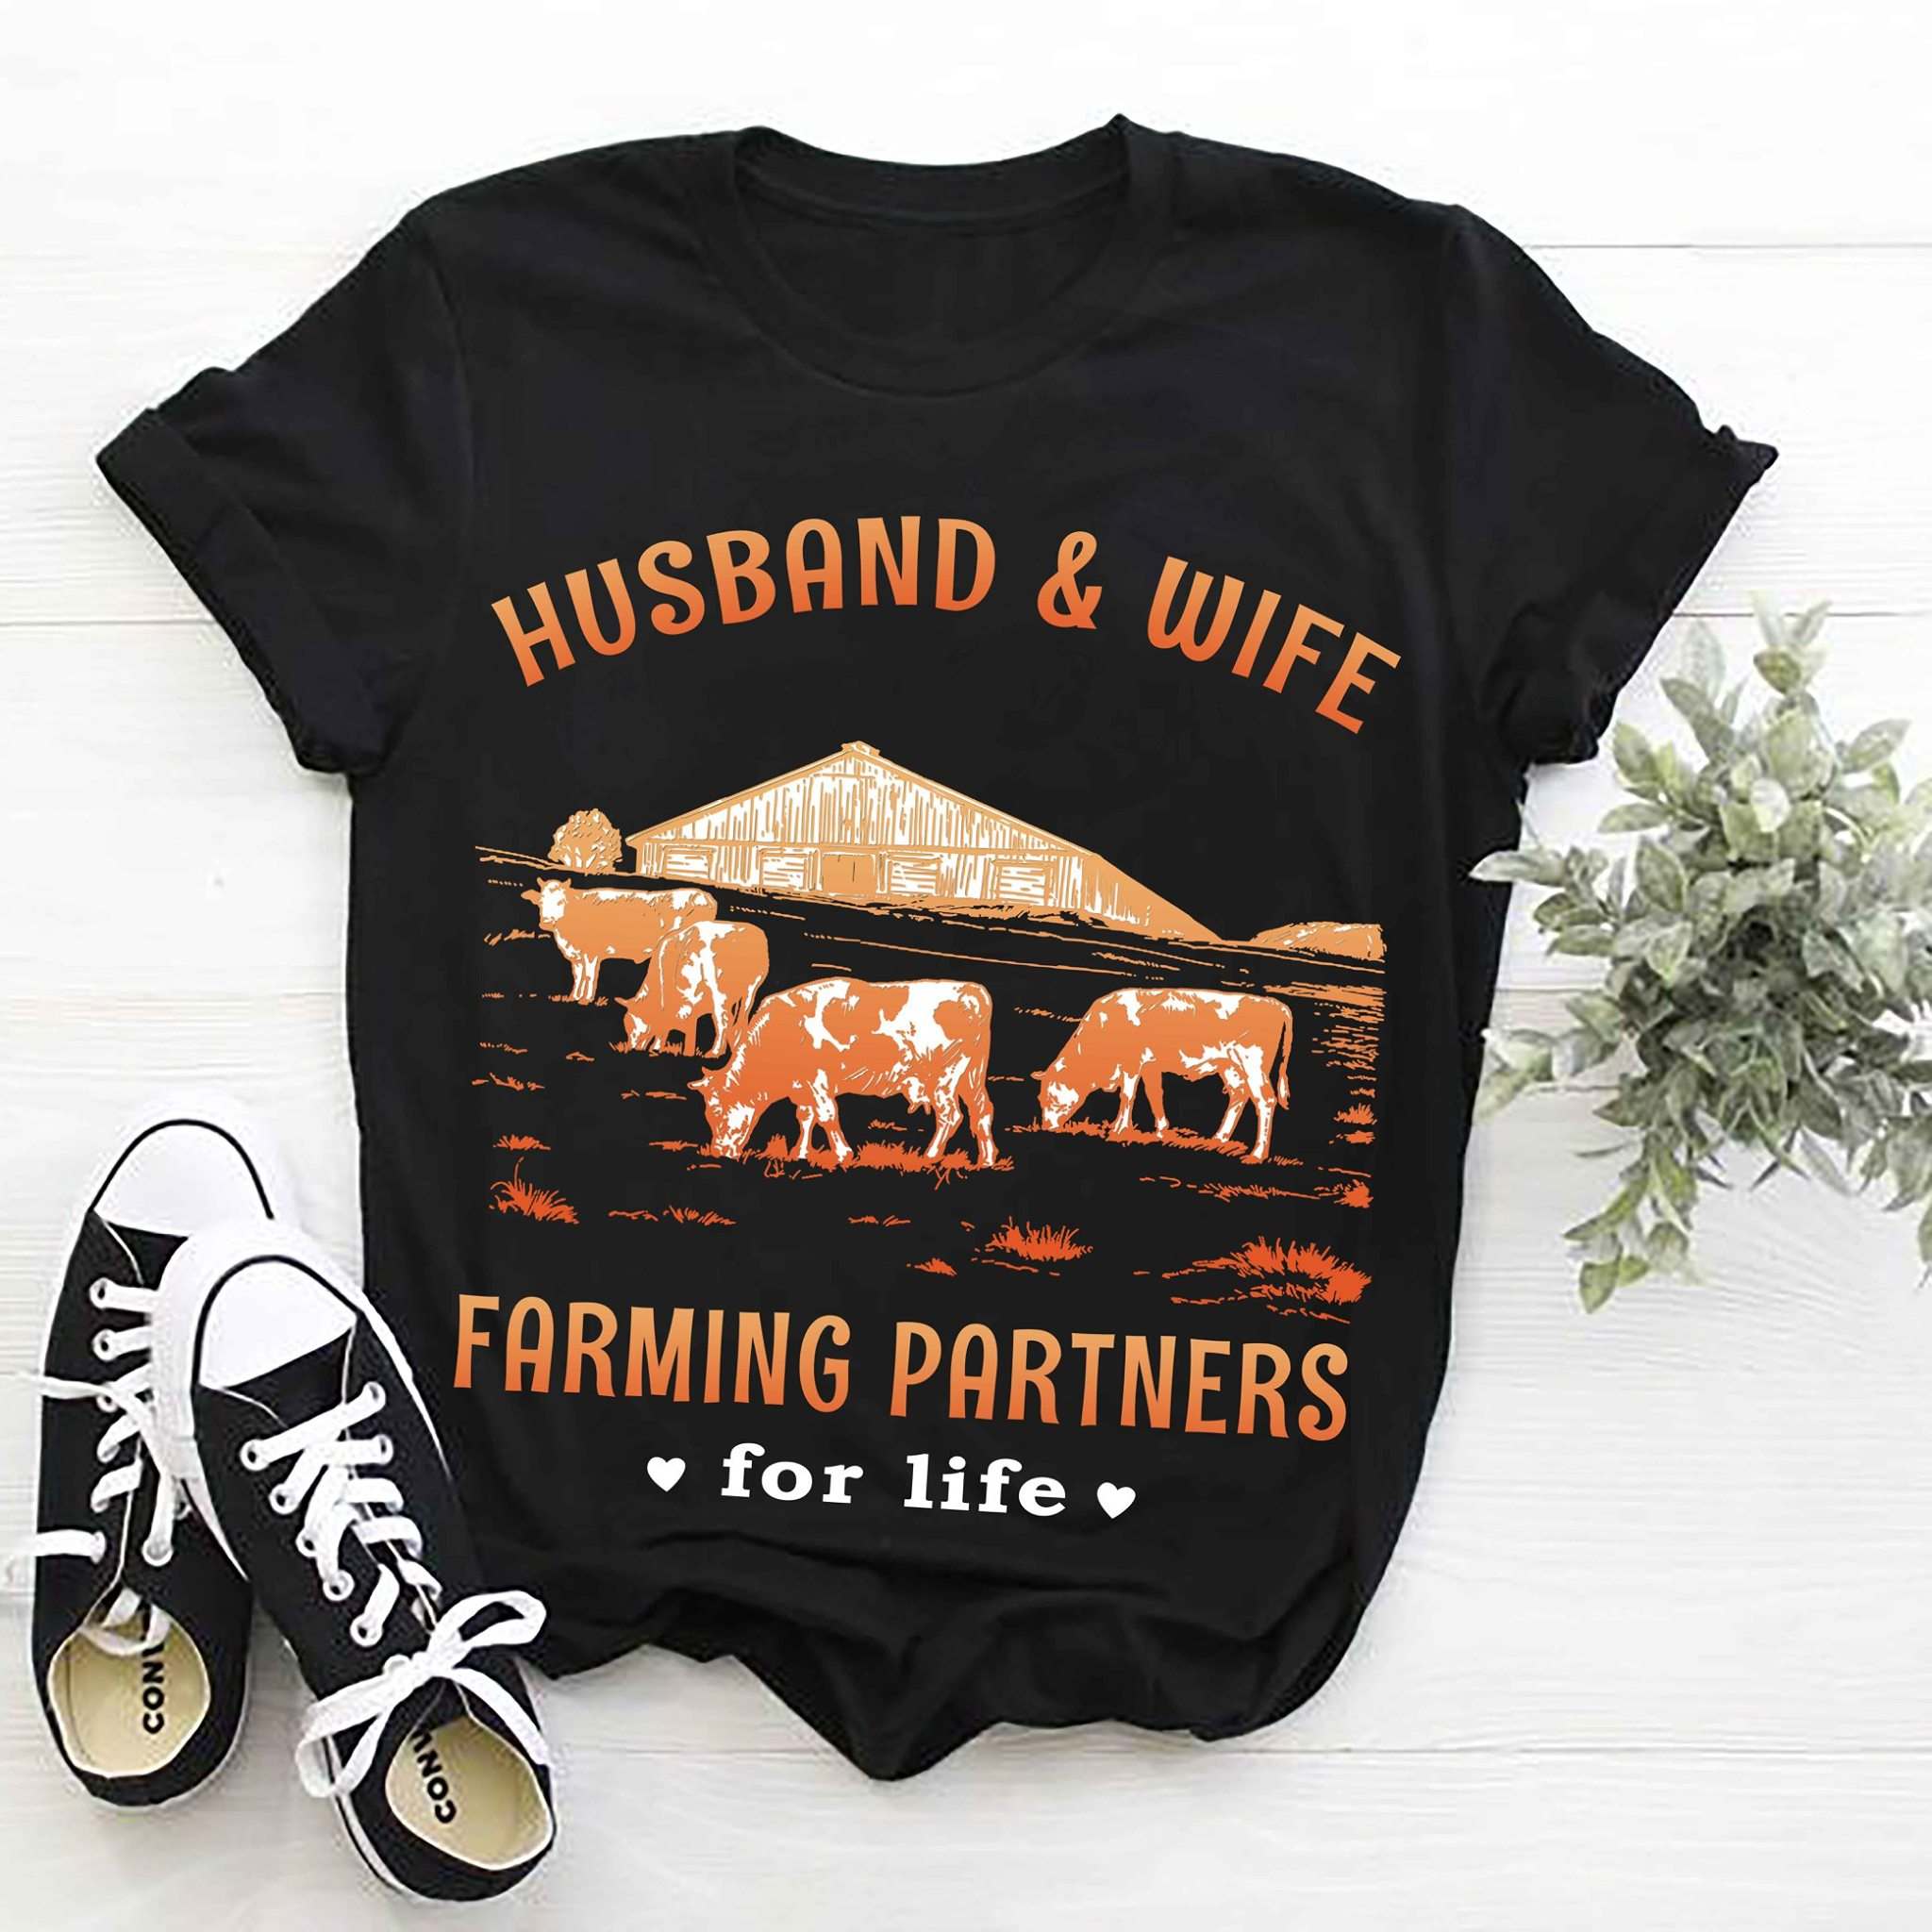 Husband and wife farming partners for life - Farmer couple